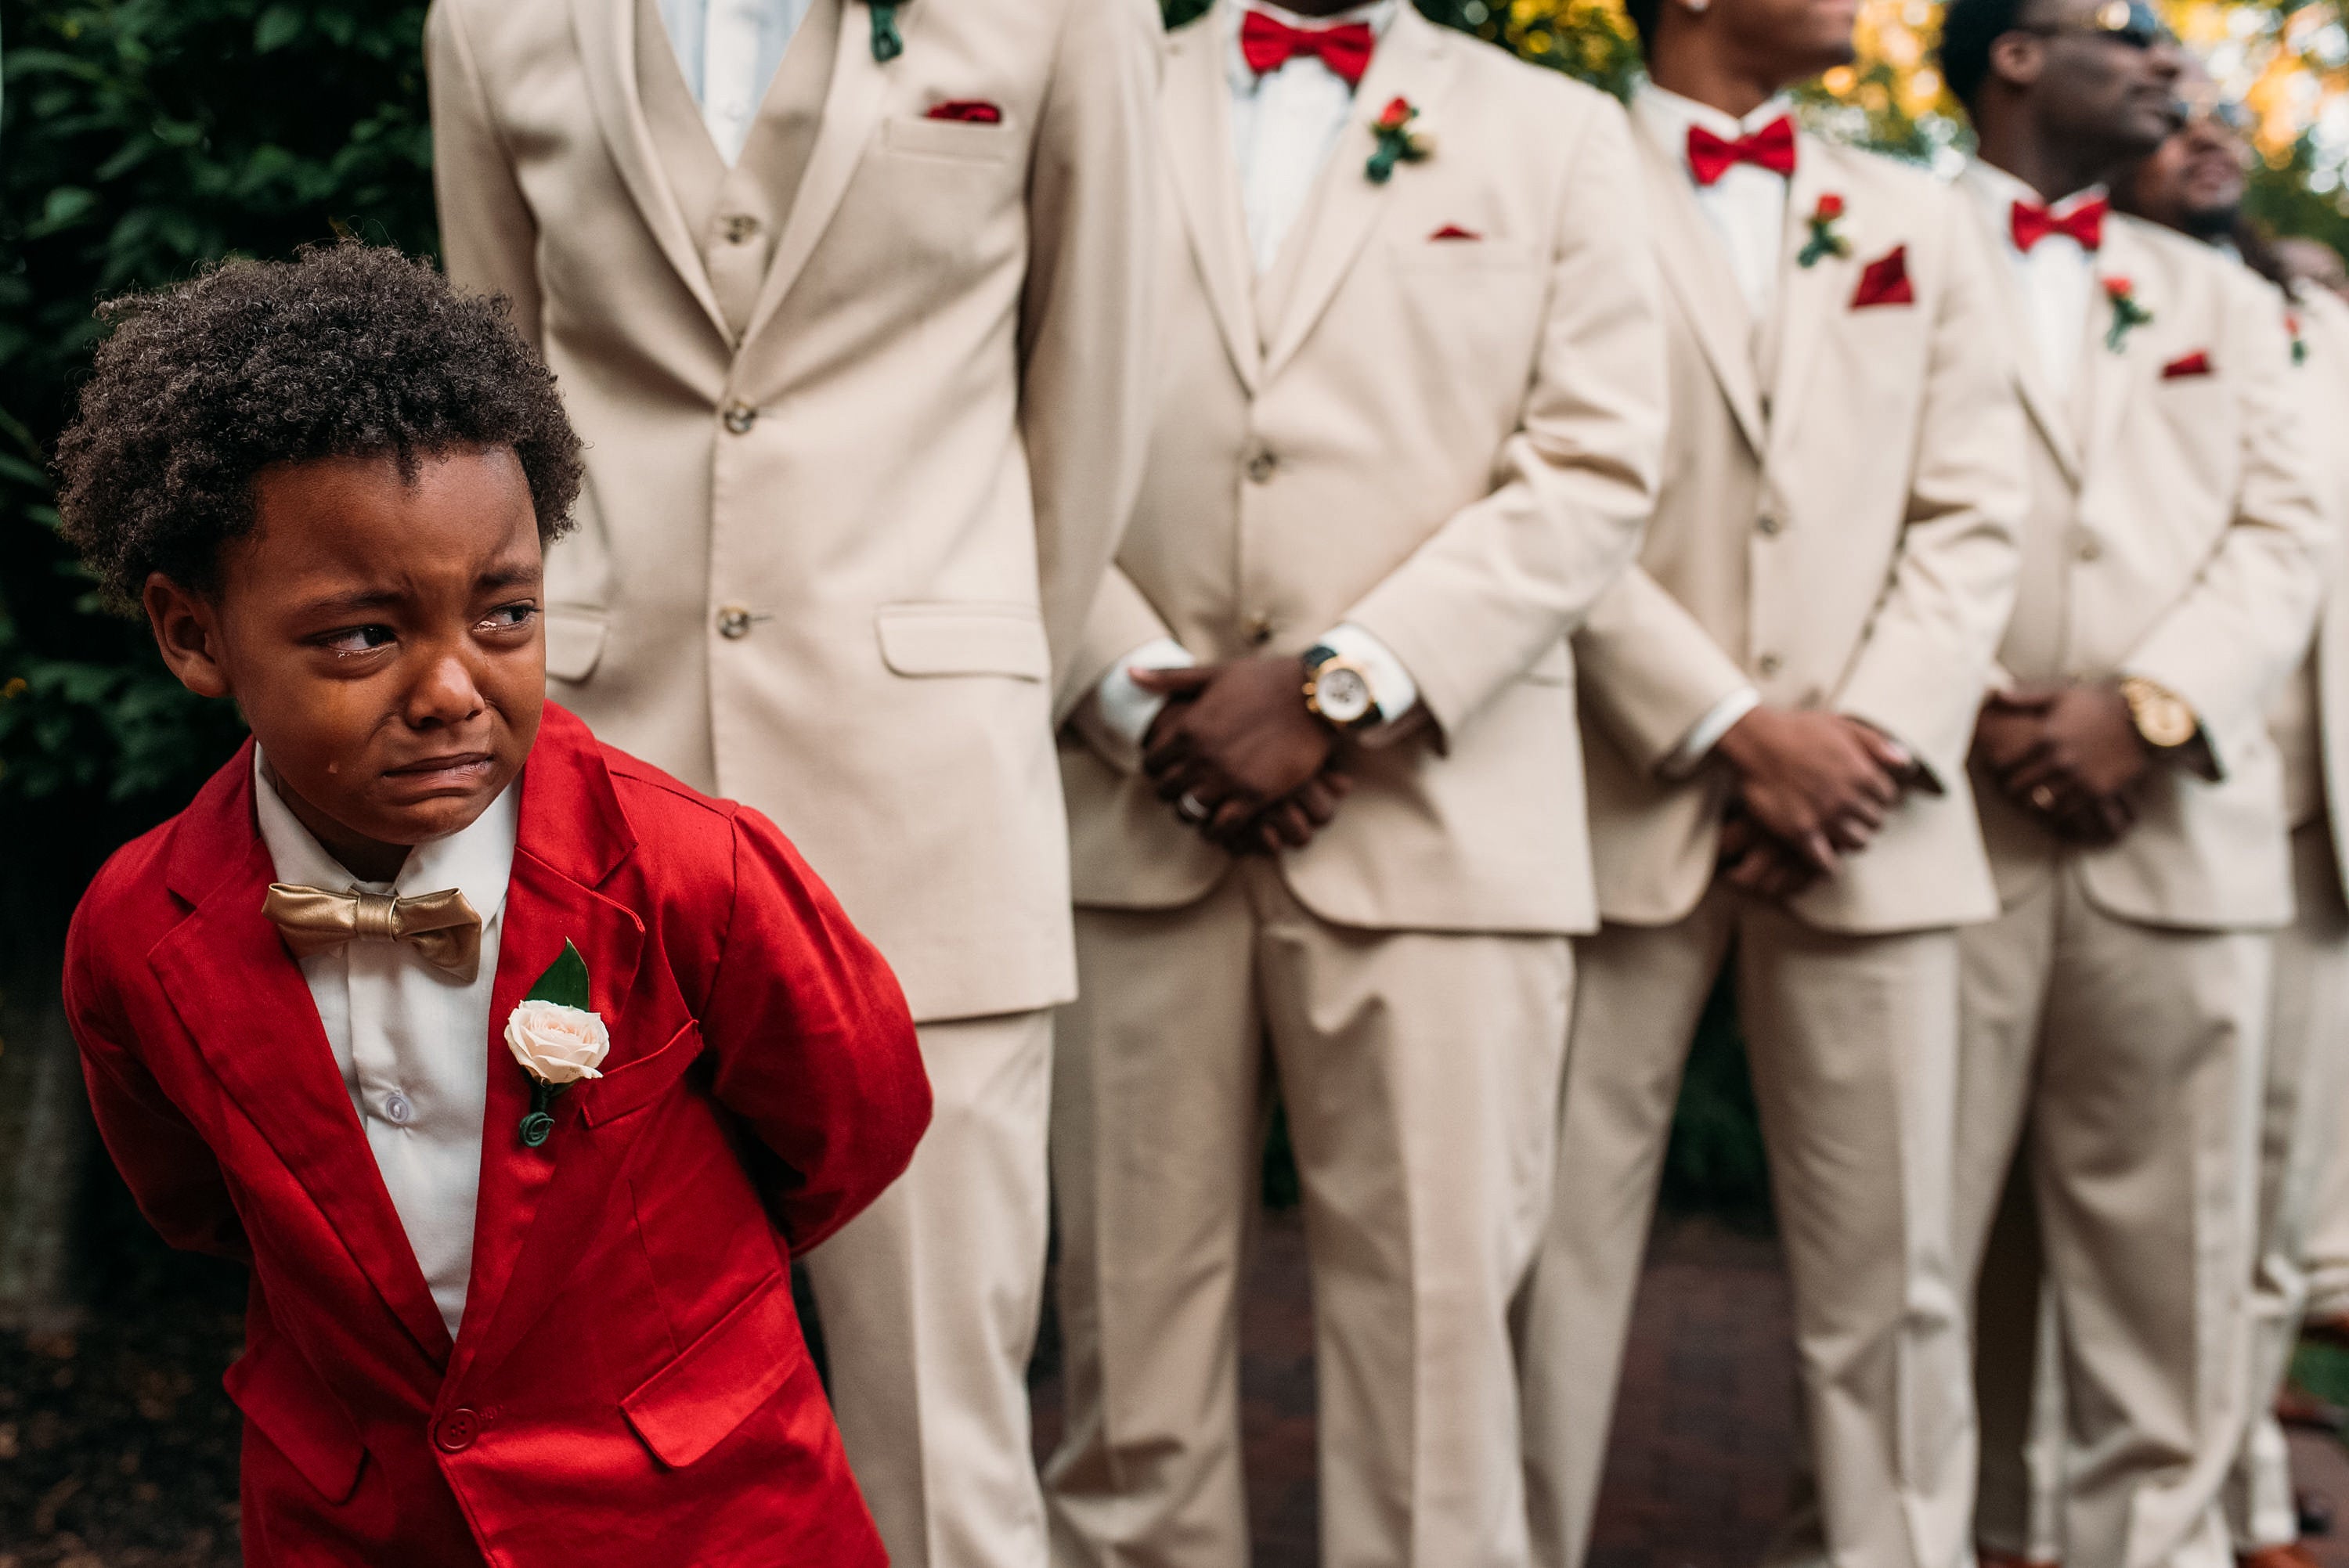 This Little Boy Was Moved To Tears Watching His Mom Walk Down The Aisle To Marry His Dad and We're So Touched
